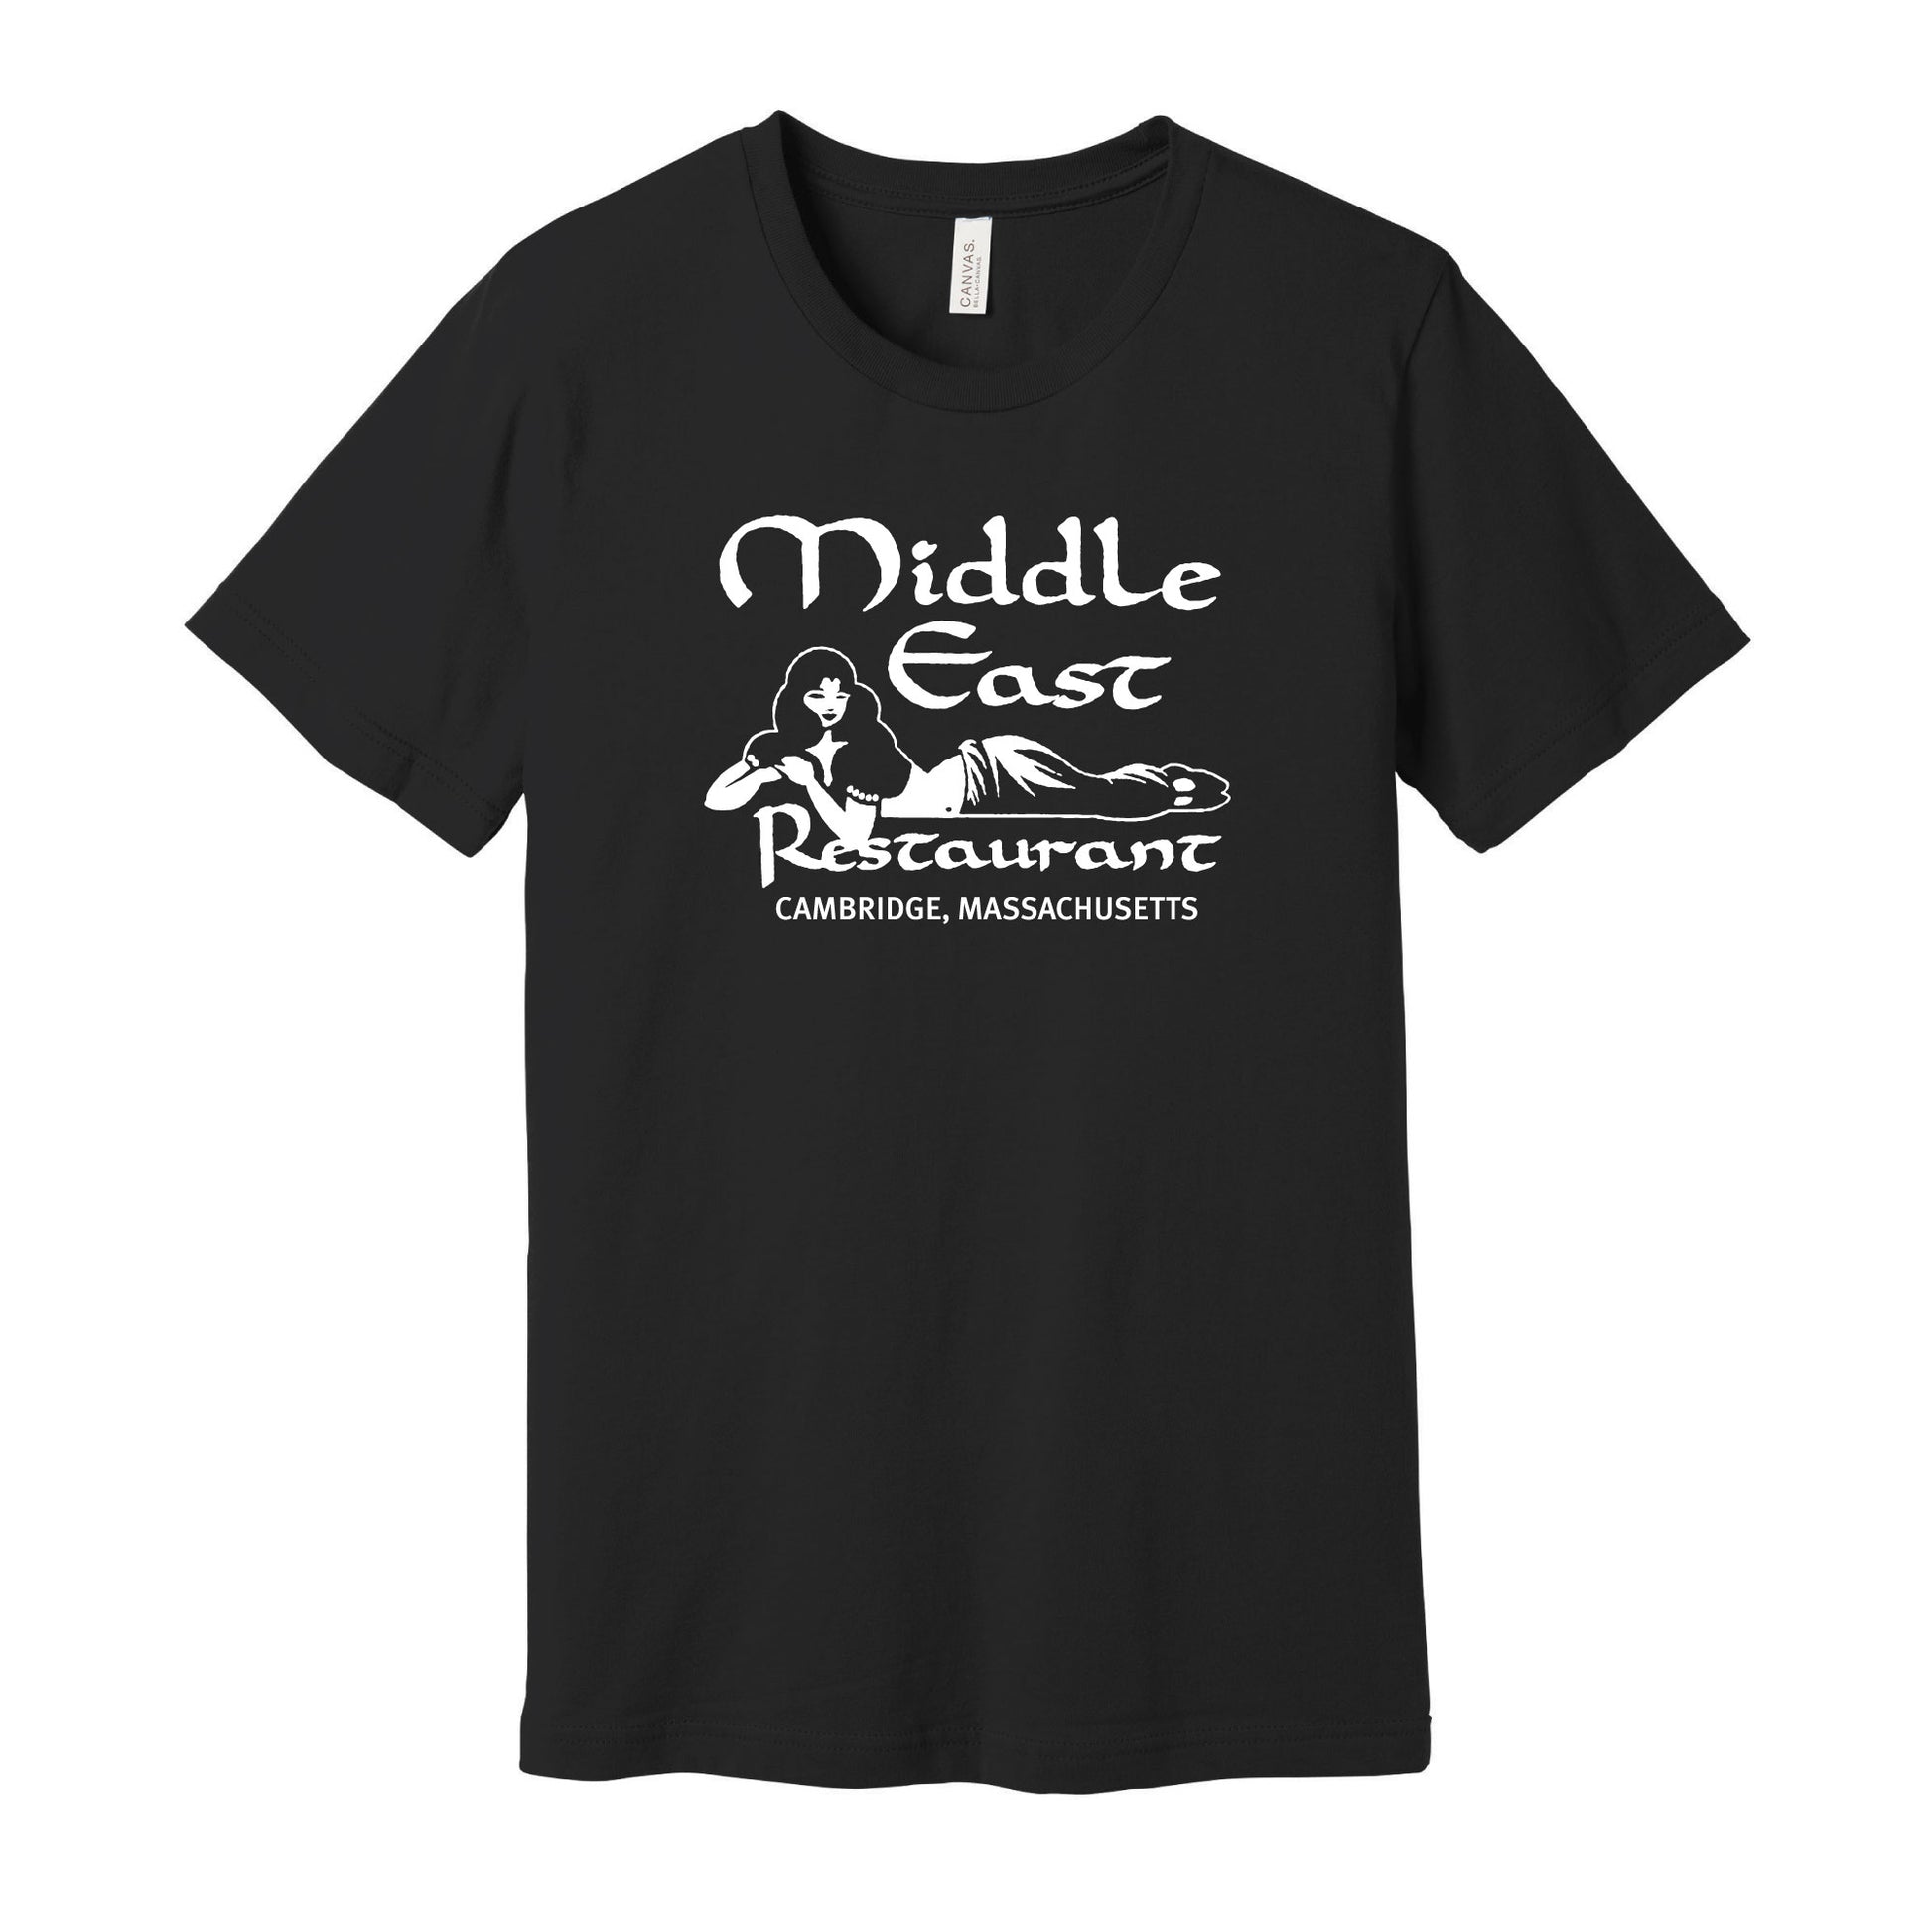 black unisex cotton t-shirt with The logo of The Middle East Restaurant and Nightclub in Cambridge, MA 